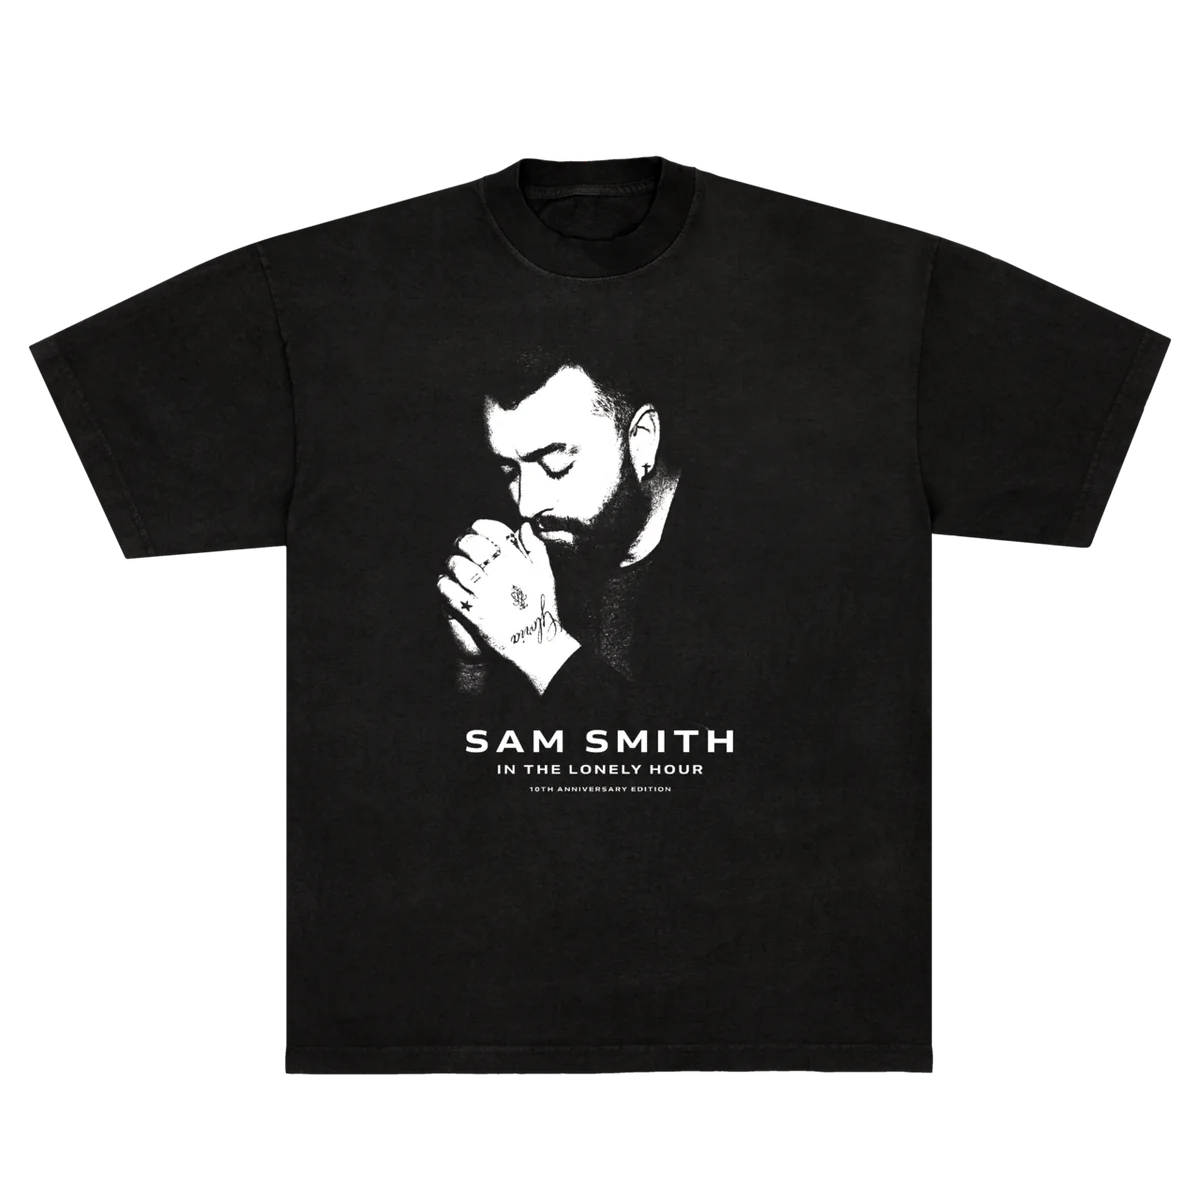 Sam Smith - In The Lonely Hour T-Shirt